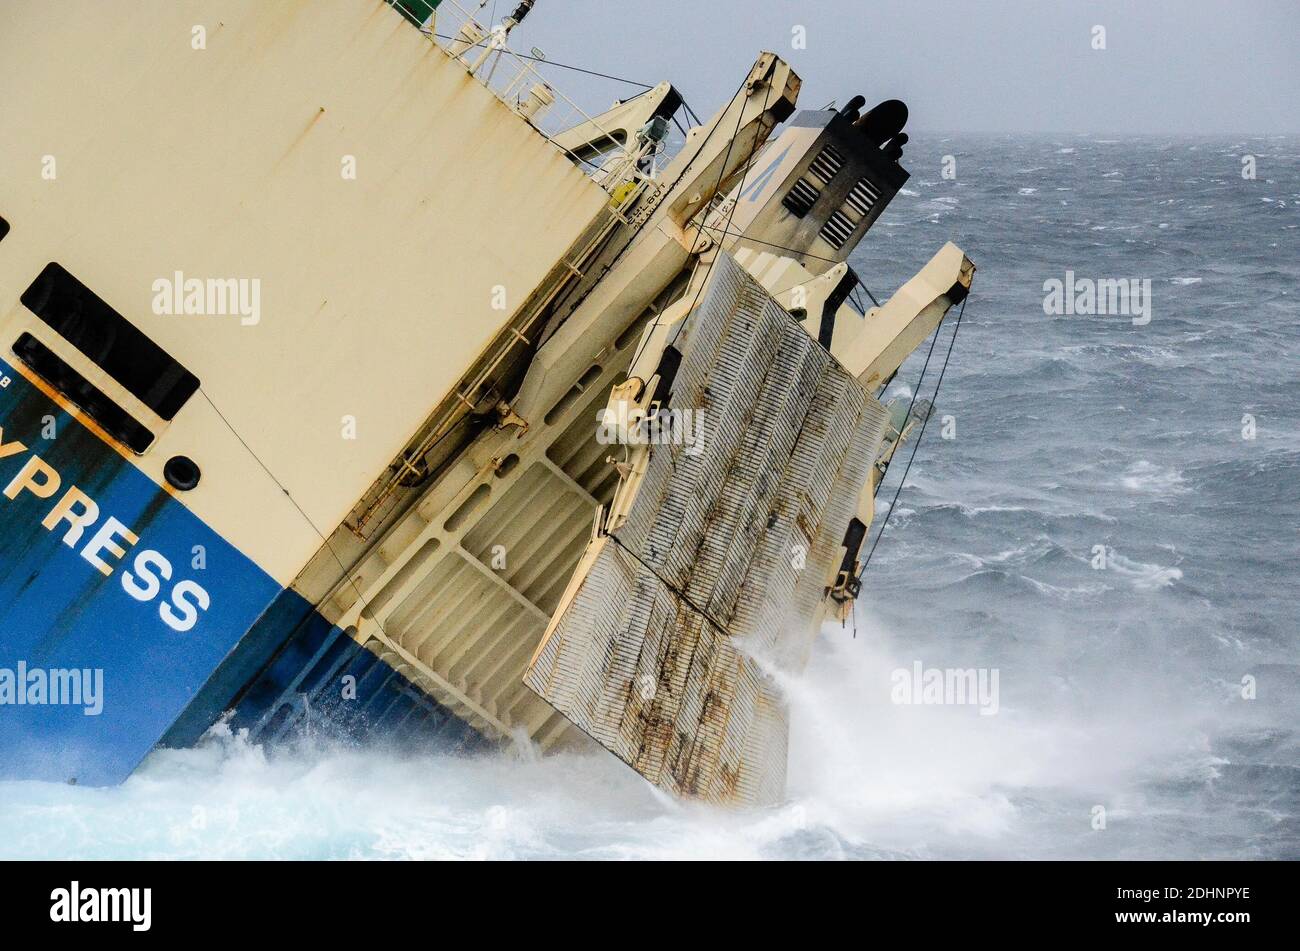 Handout picture shows A salvage team has been dropped by helicopter aboard the Modern Express, January 30, 2016. The Panamanian-flagged pure car and truck carrier (PCTC) Modern Express developed a severe list on Tuesday while underway in the Bay of Biscay on a voyage from Gabon, Africa to the port of Le Havre, France. All 22 crew members were evacuated by Spanish search and rescue helicopters. The ship entered French waters a short time after the rescue and has since been drifting east at a speed of 1 to 3 knots. It is carrying 3,600 tons of timber and construction equipment. Photo by Loic Ber Stock Photo